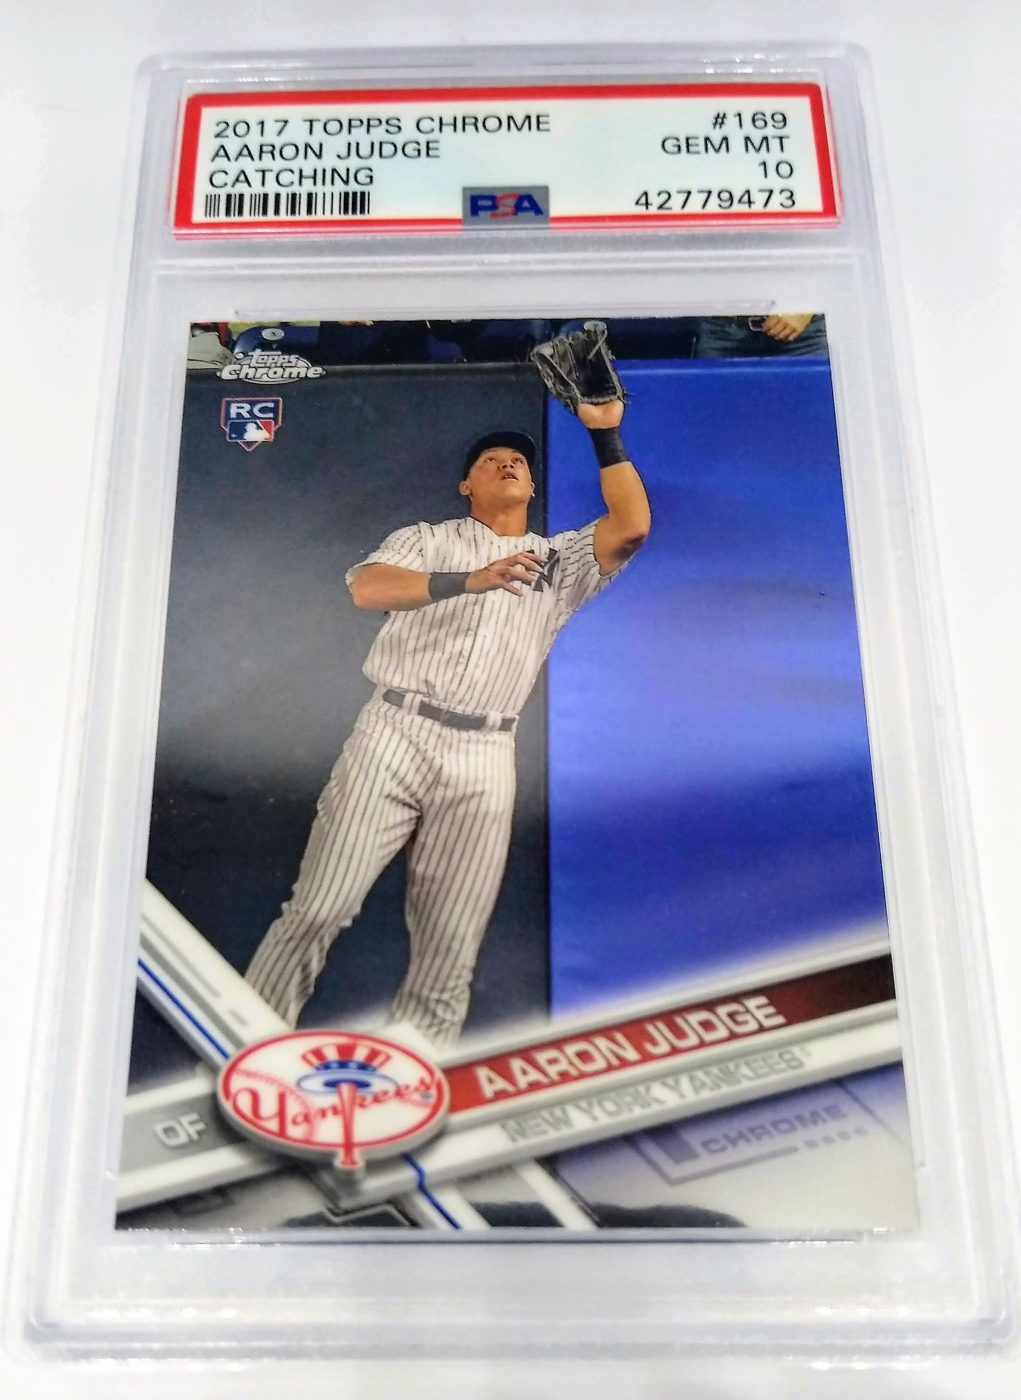 2017 Topps Chrome Aaron Judge Catching PSA 10 Graded Rookie Card